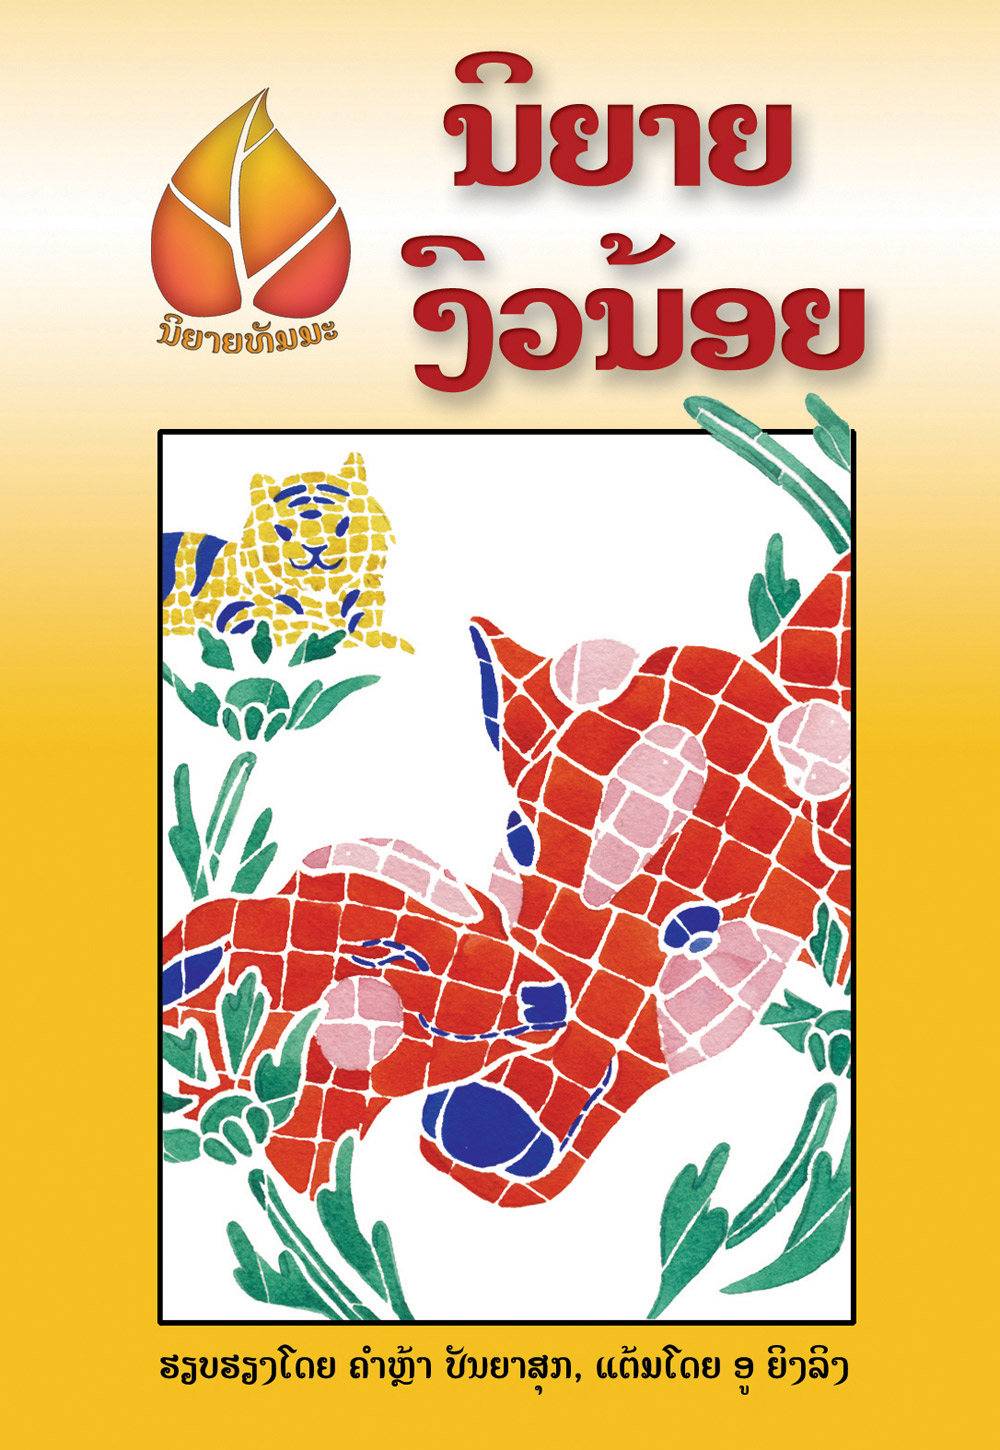 Little Cow large book cover, published in Lao language